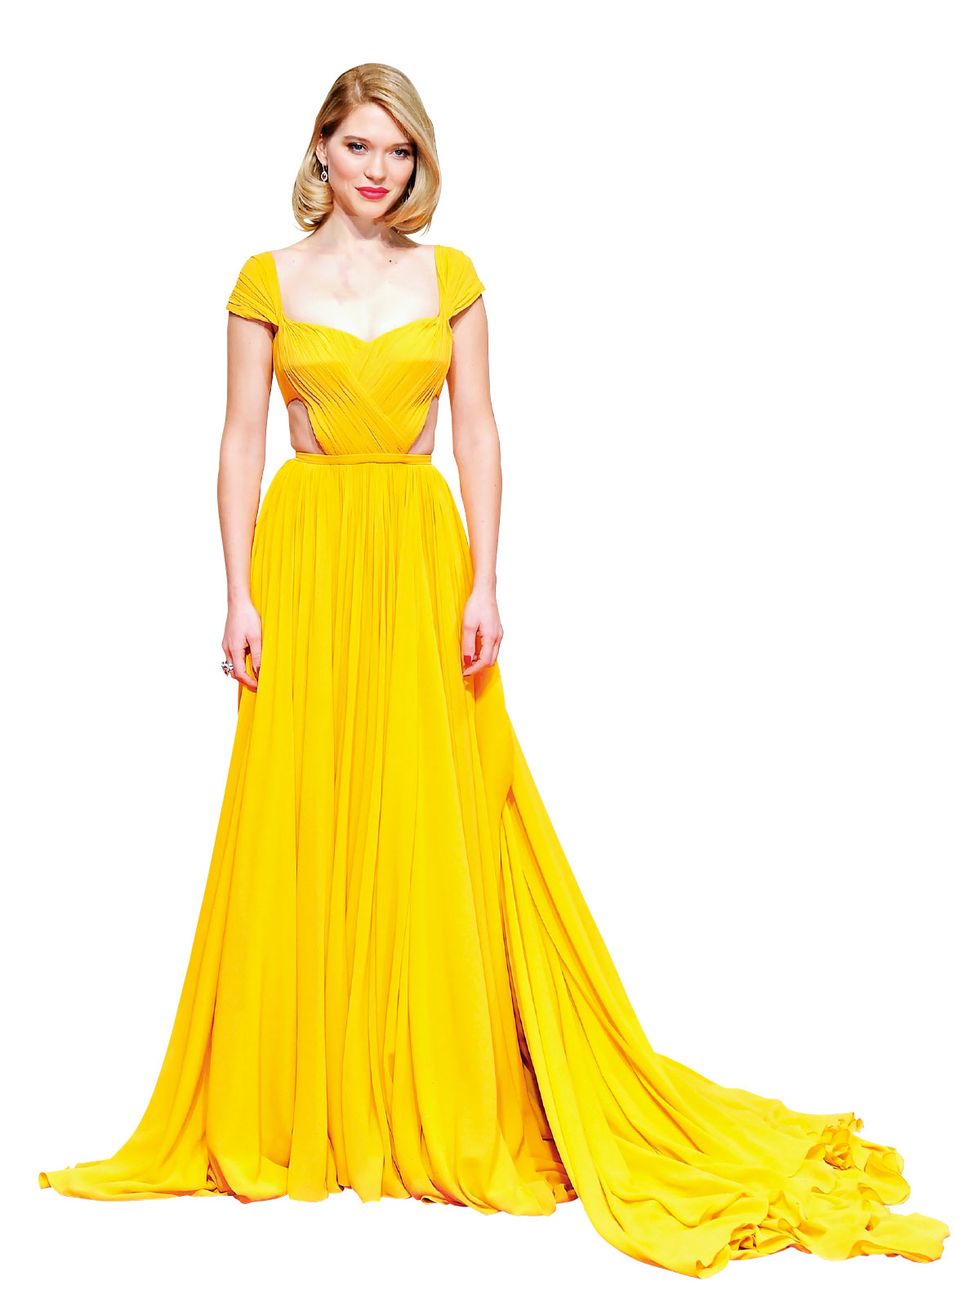 Clothing, Dress, Gown, Fashion model, Yellow, Day dress, Shoulder, A-line, Bridal party dress, Formal wear, 